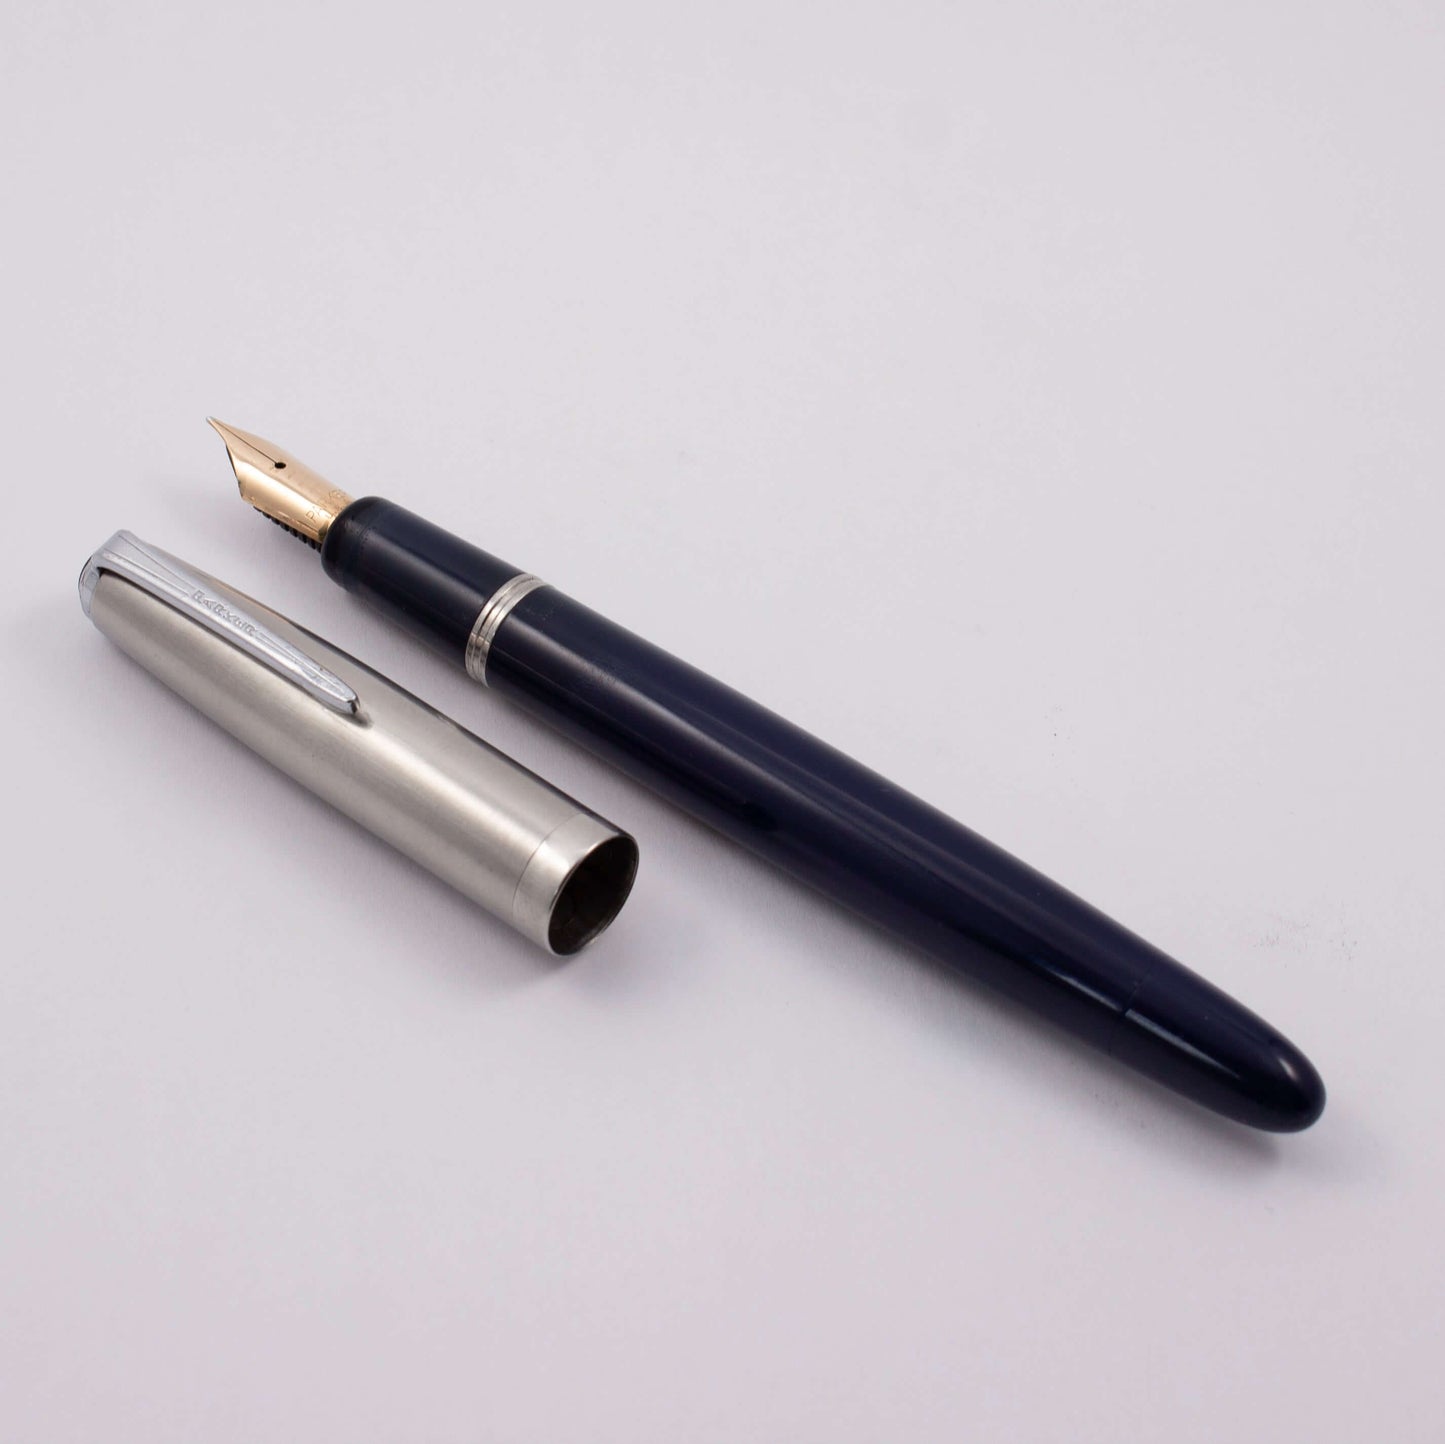 Parker VS Fountain Pen, 1947, Royal Blue with a Lustraloy Cap, Button Filler with a 14k Gold Nib Type: Restored Fountain Pen Product Name: Parker VS Manufacture Year: 1947 Length: 5 1/2 Filling System: Button filler with aluminum button Color/Pattern: Roy